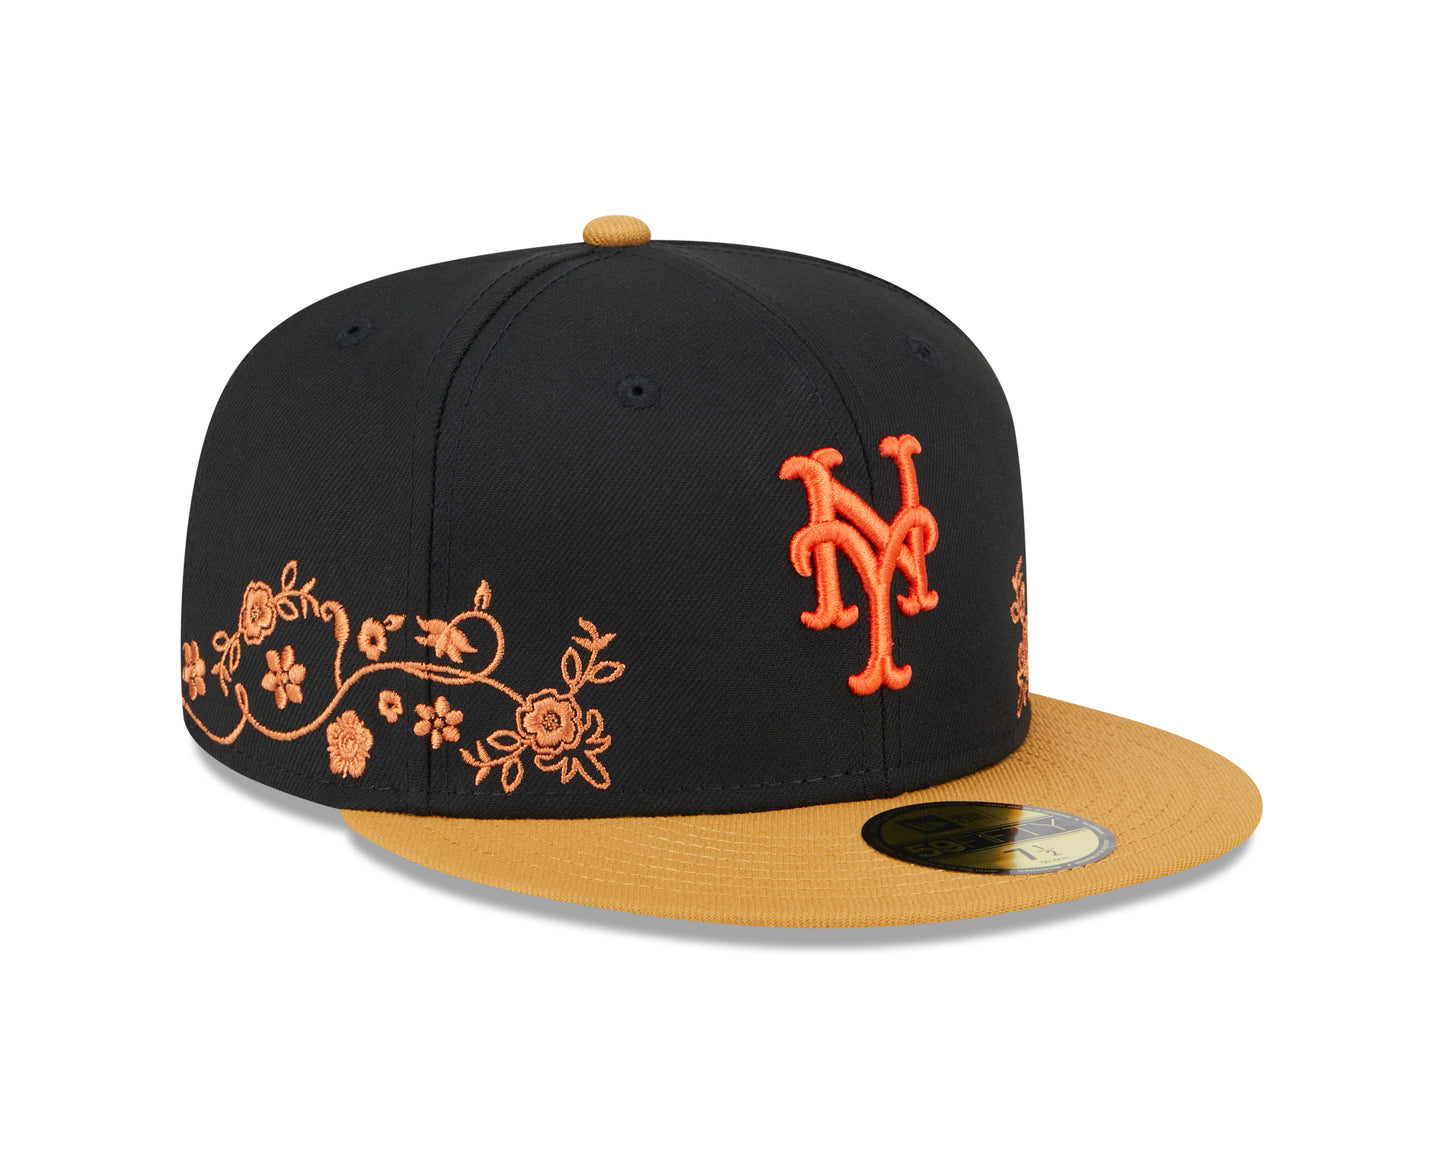 New Era - 59Fifty Fitted - FLORAL VINE - New York Mets - Black - Headz Up 